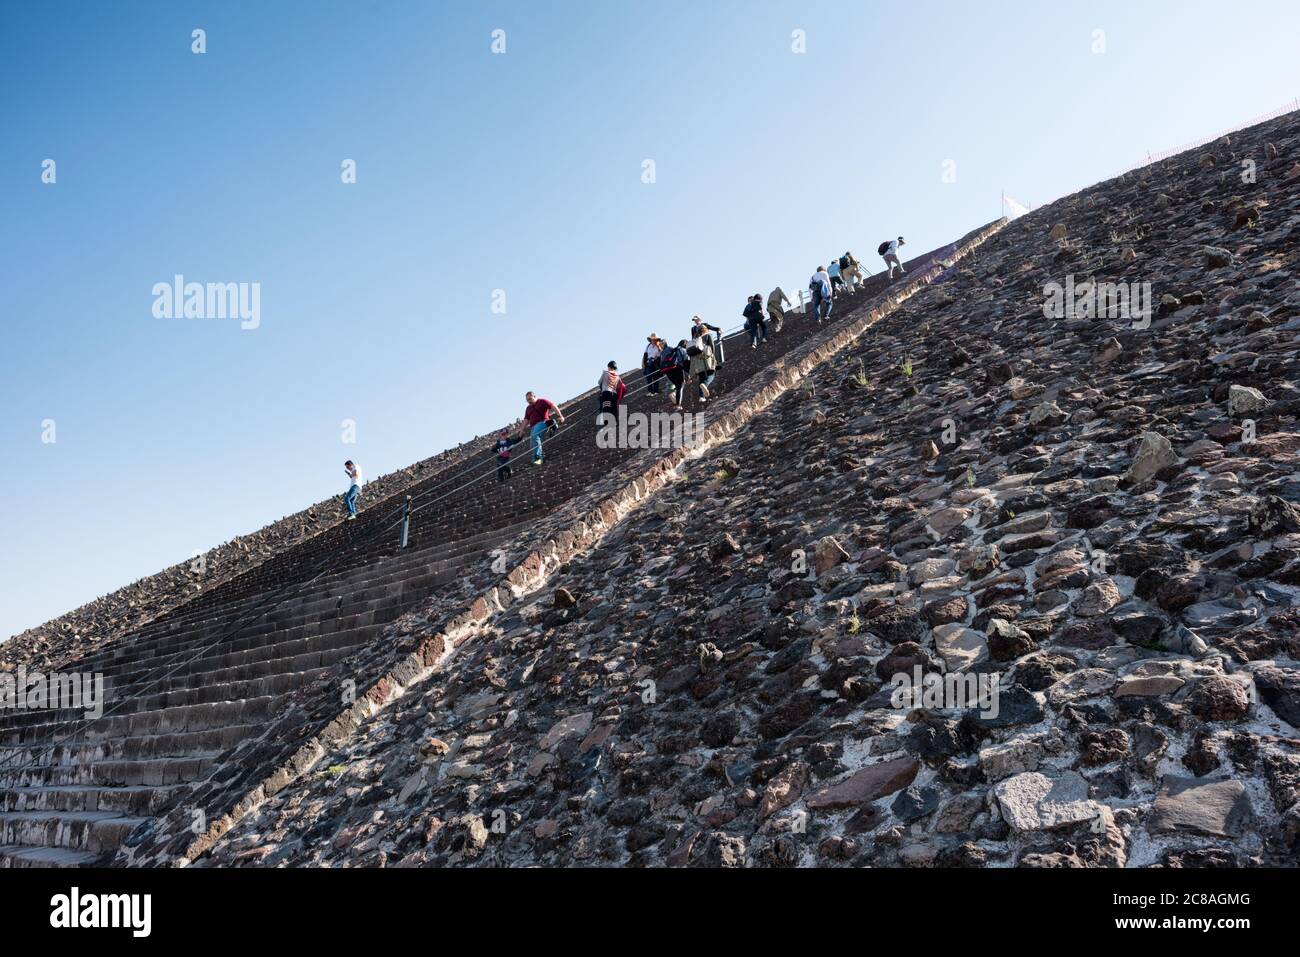 TEOTIHUACAN, Mexico - Climbing the Pyramid of the Sun at Teotihuacan Archeological Site. Teotihuacan is an ancient Mesoamerican city located about 25 Stock Photo